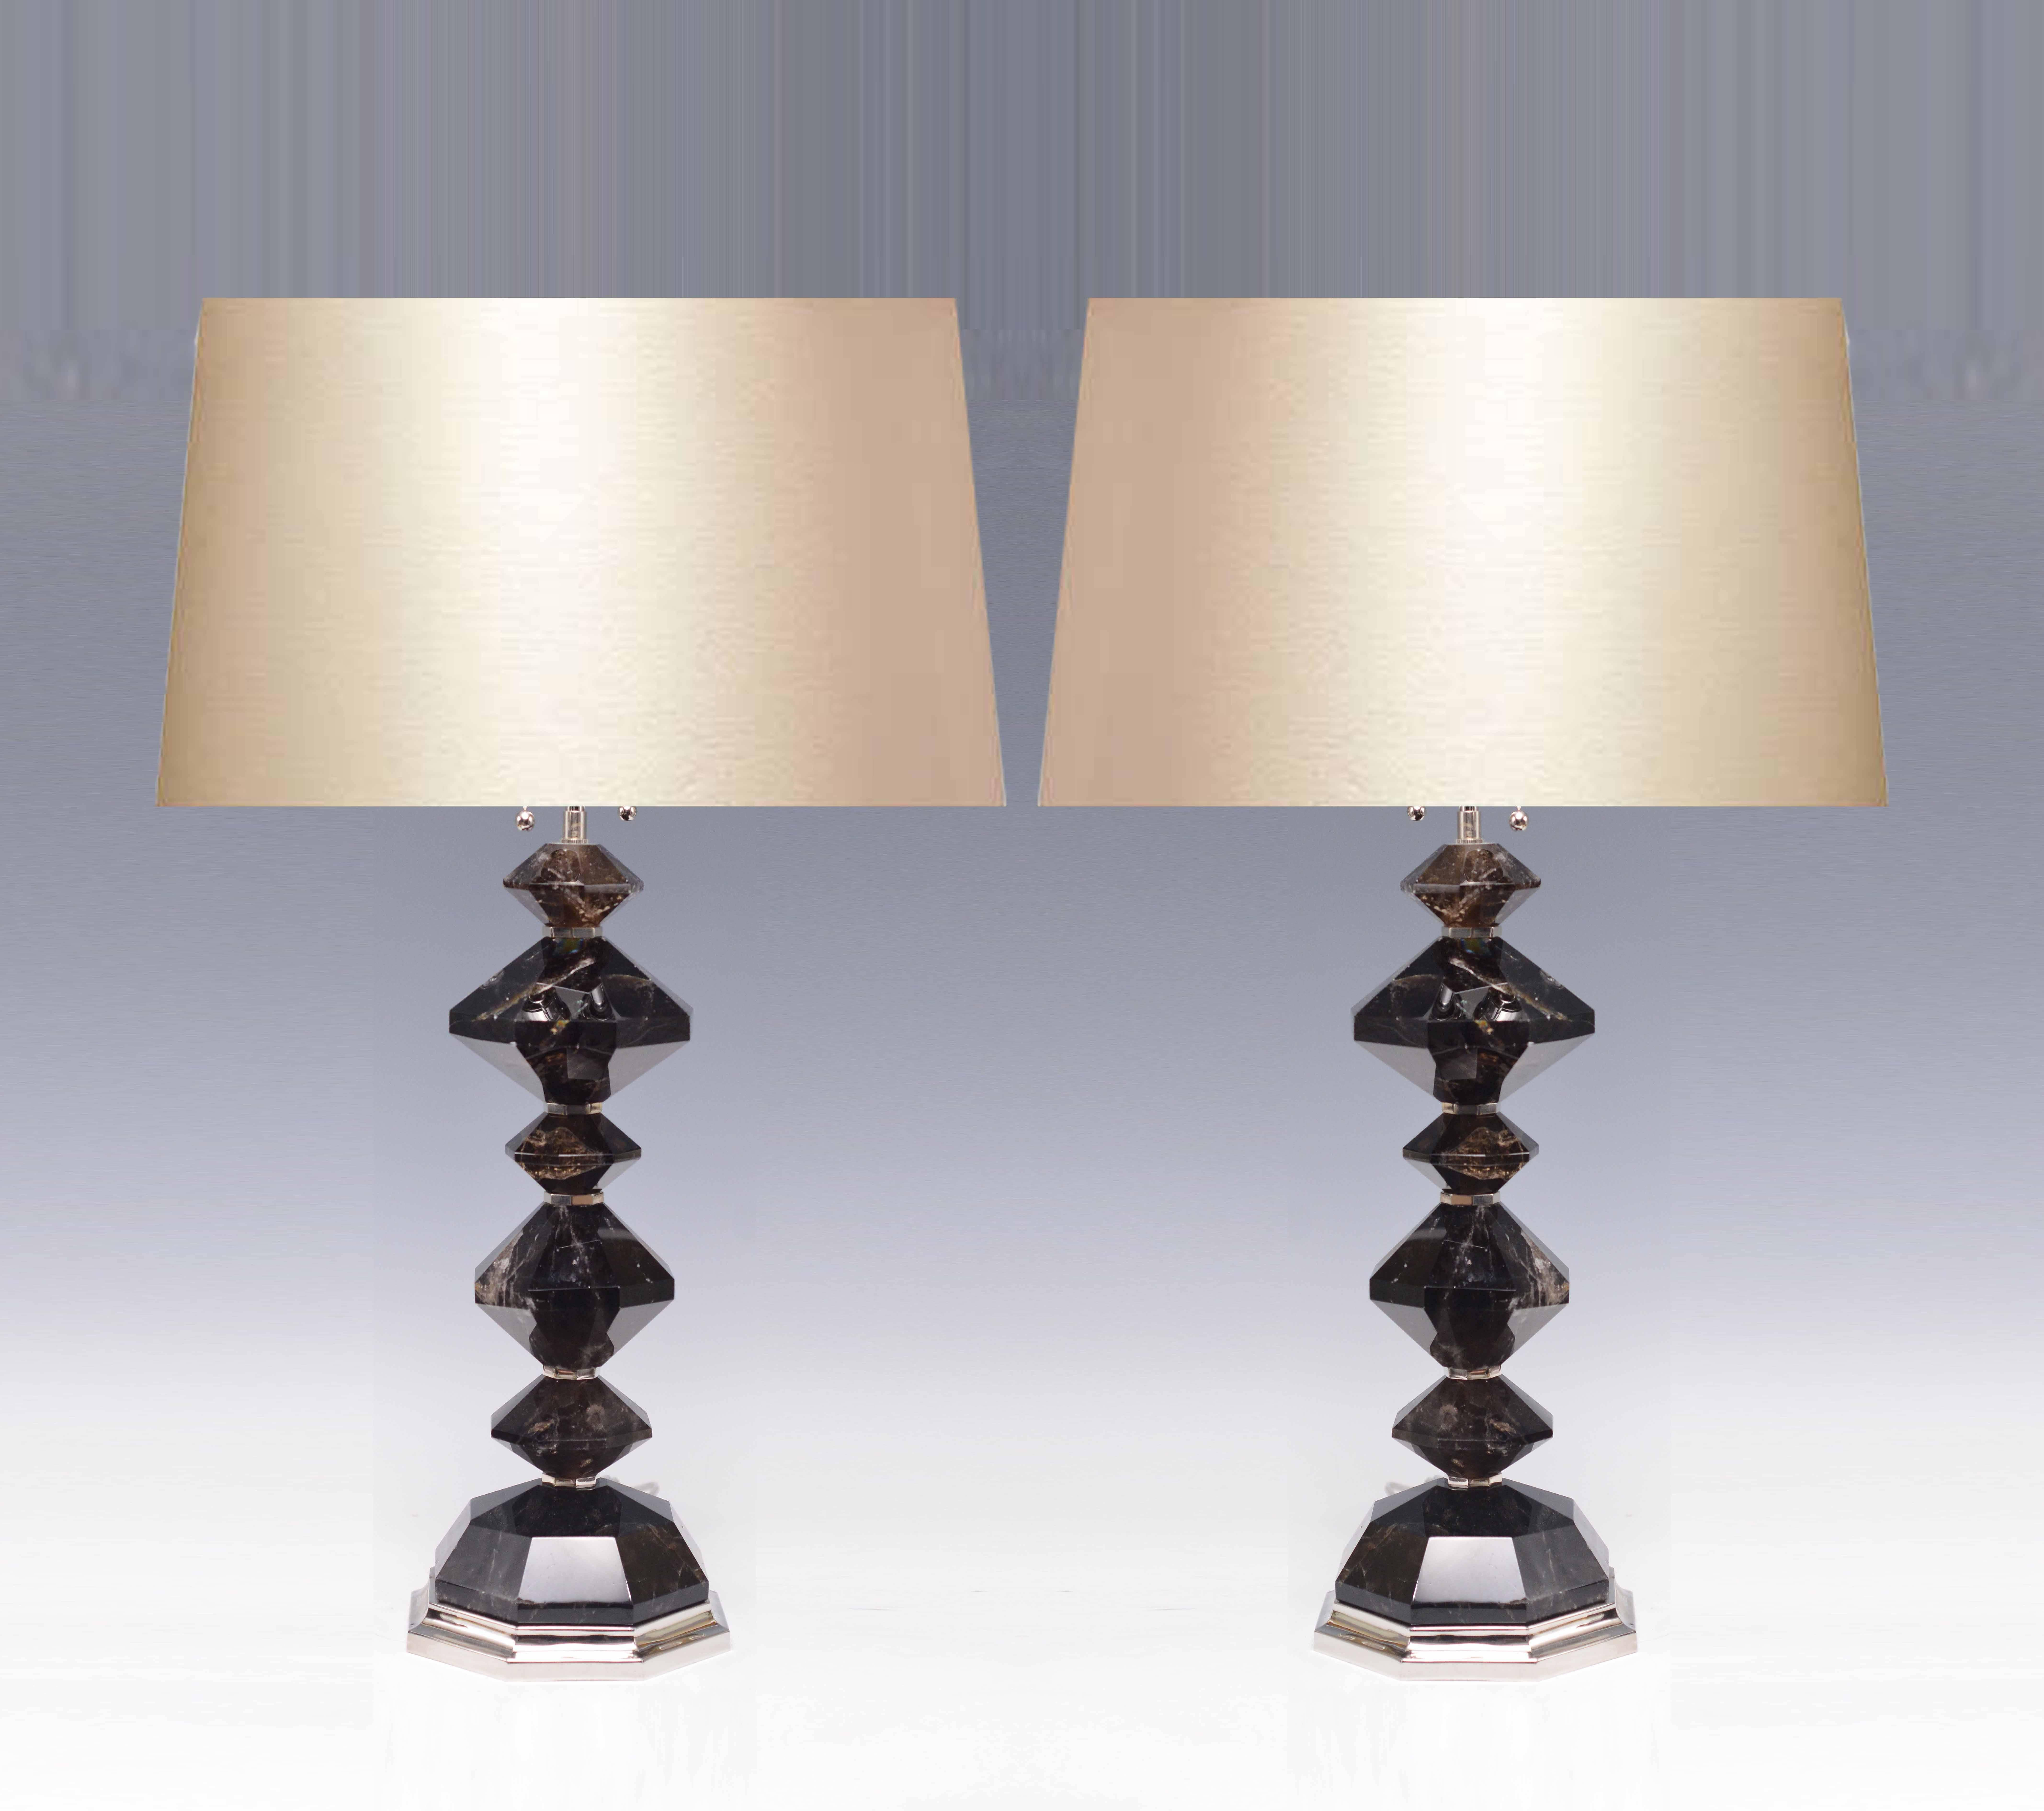 A fine carved dark diamond rock crystal quartz lamp with nickel plating base and parts, created by Phoenix Gallery, NYC
Available in polish brass and antique brass finished. 
To the rock crystal: 19.5 in/H.
(Lampshade not included).